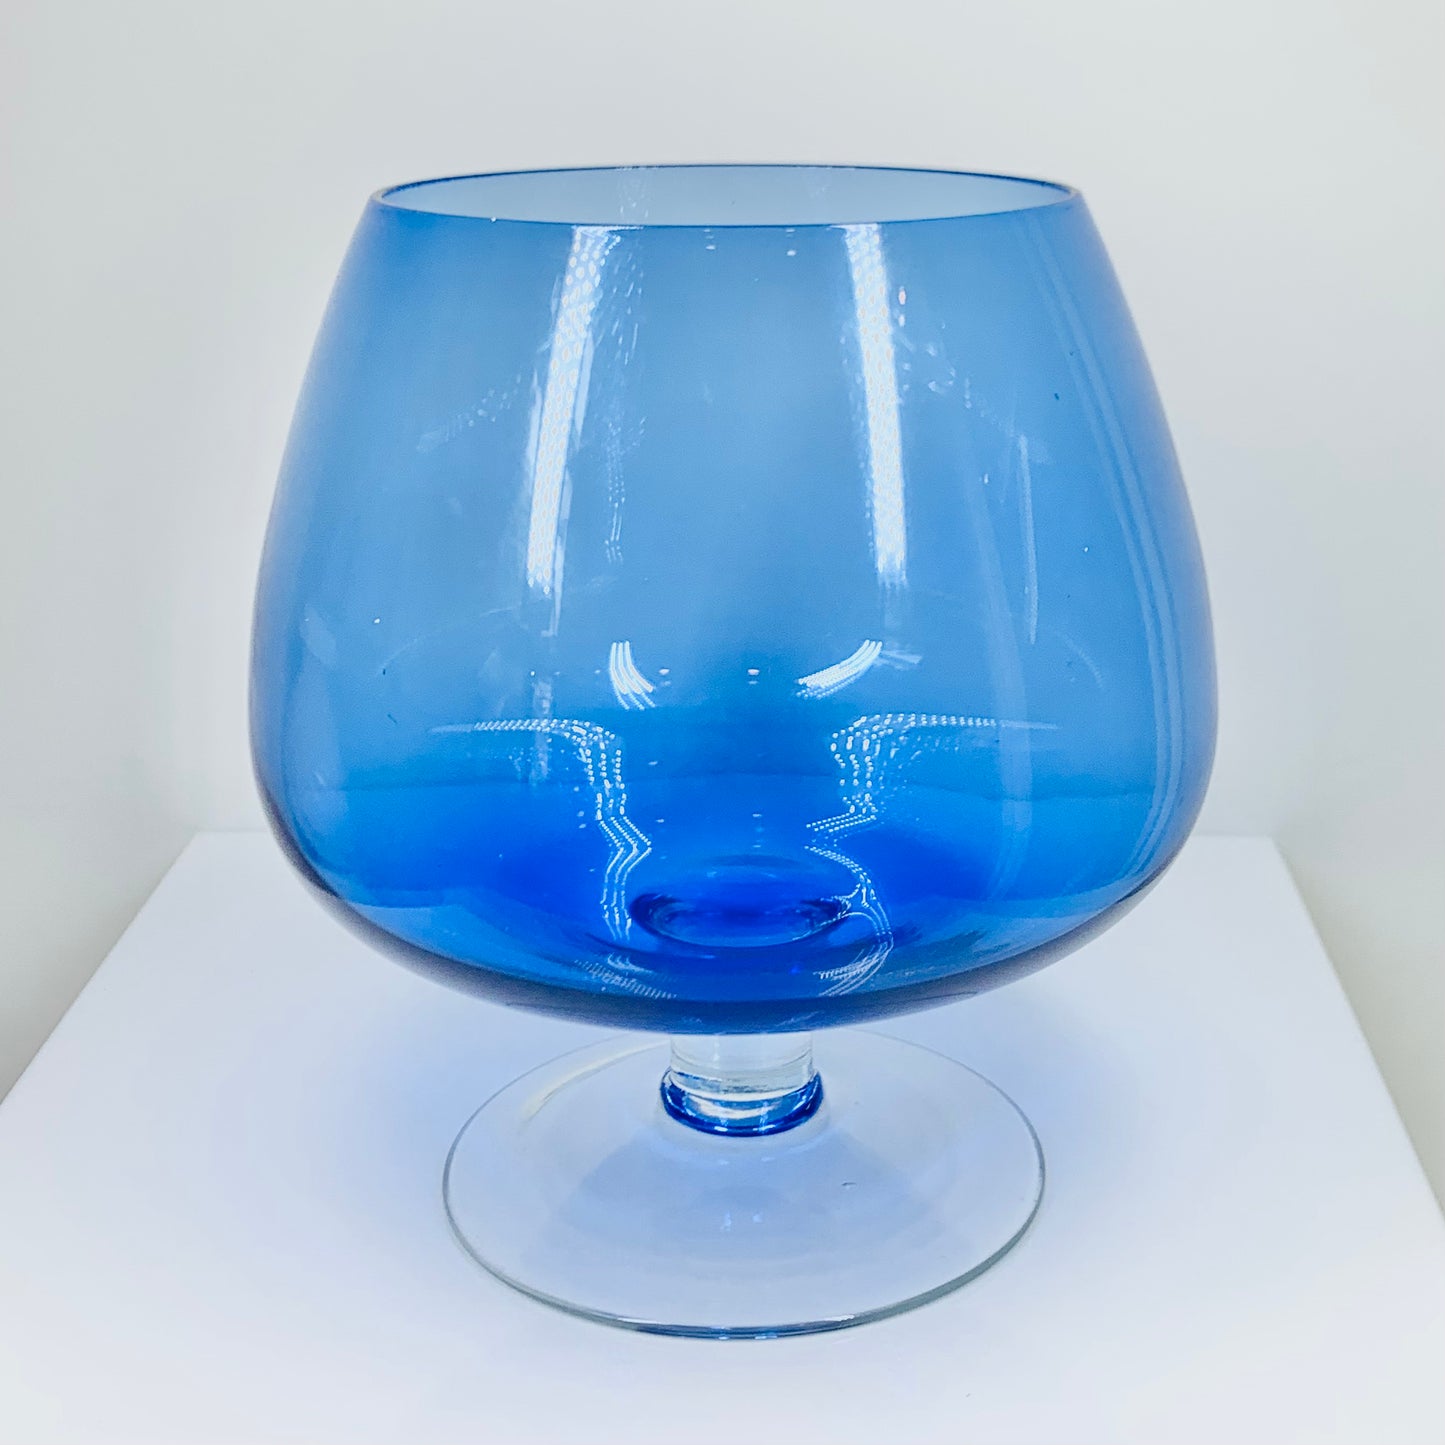 Large Midcentury Italian blue glass brandy balloon vase with clear stem